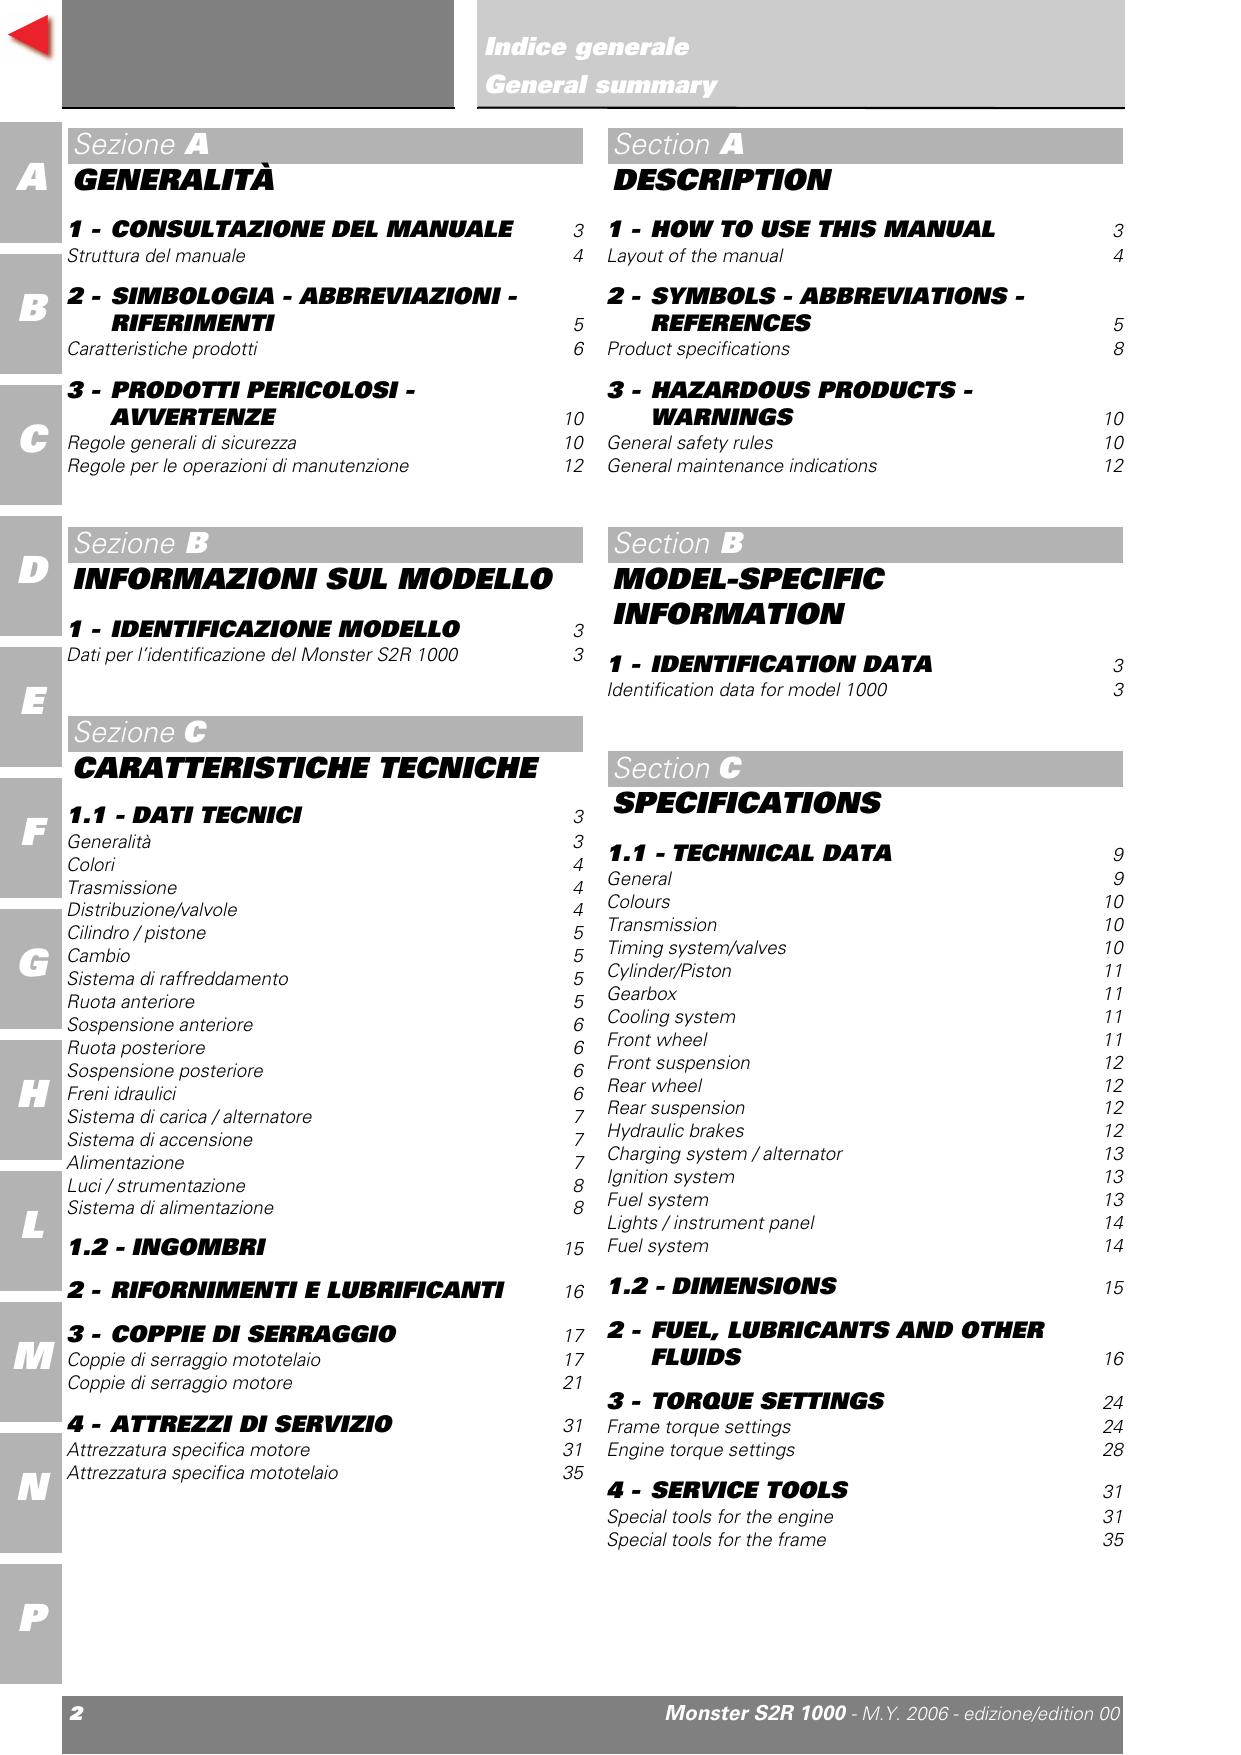 2006-2008 Ducati Monster S2R 1000 service manual Preview image 3